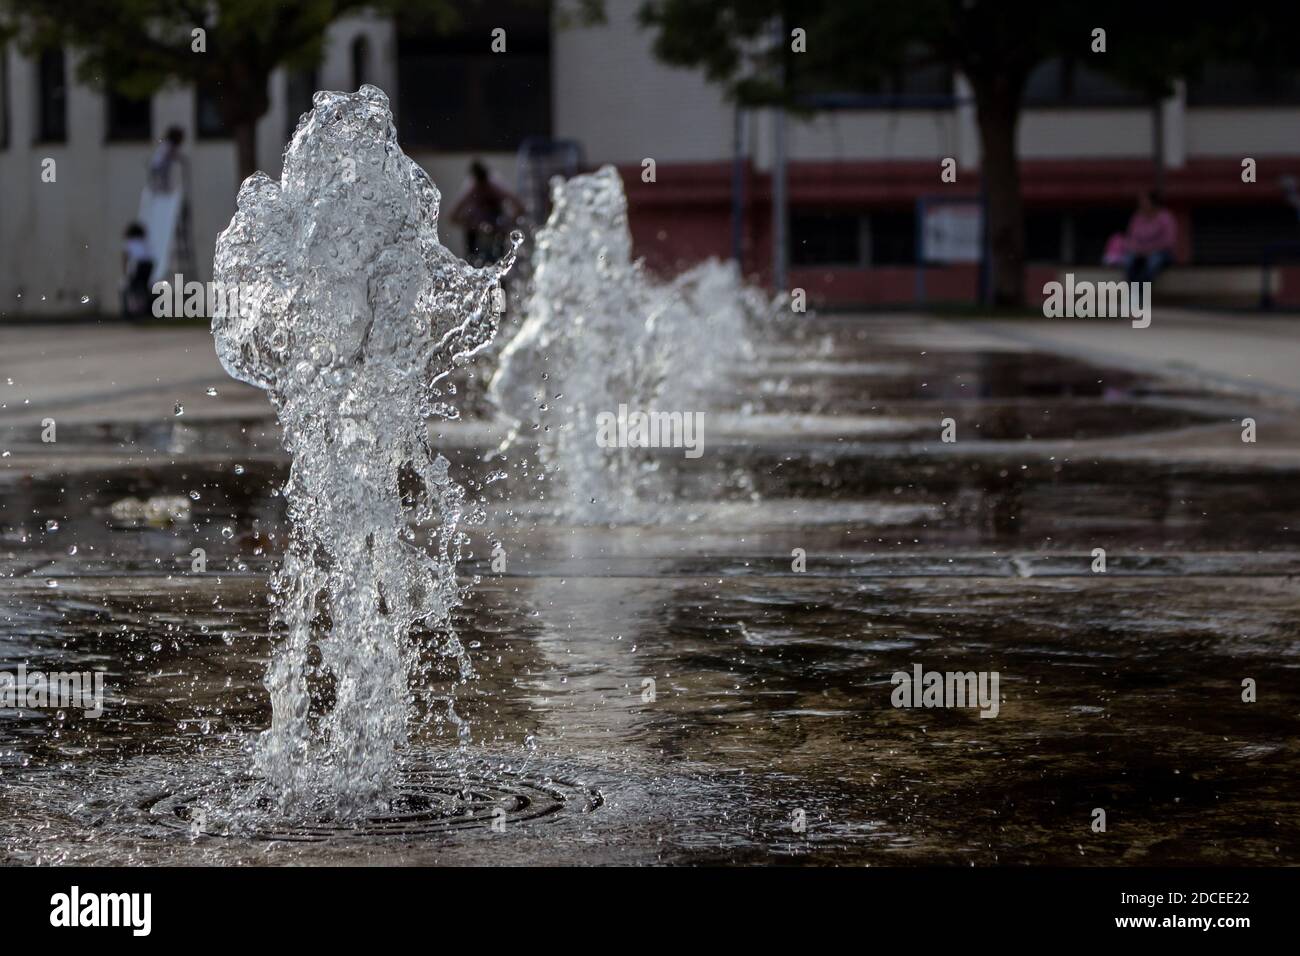 Small thick water jets of a park fountain in the town of Knjazevac, eastern Serbia. Fast shutter, water splash, close up. Stock Photo